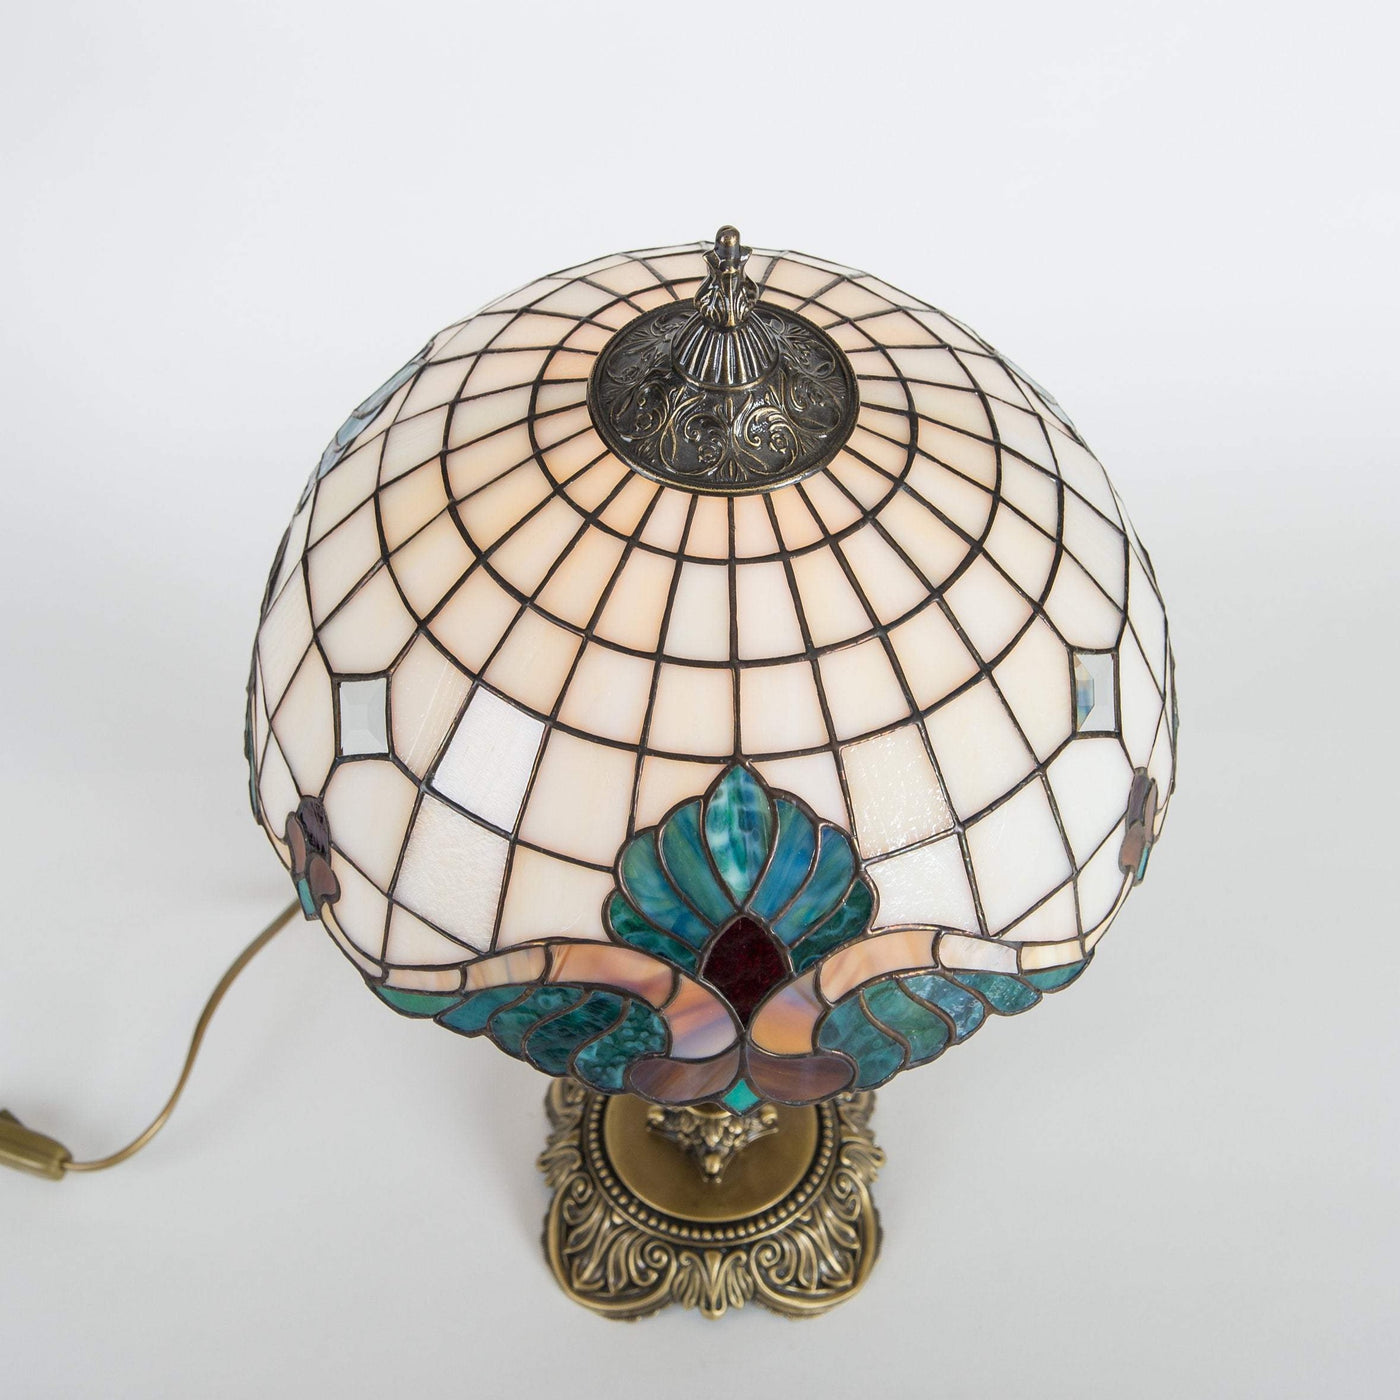 Top view of stained glass white and beige Tiffany lamp